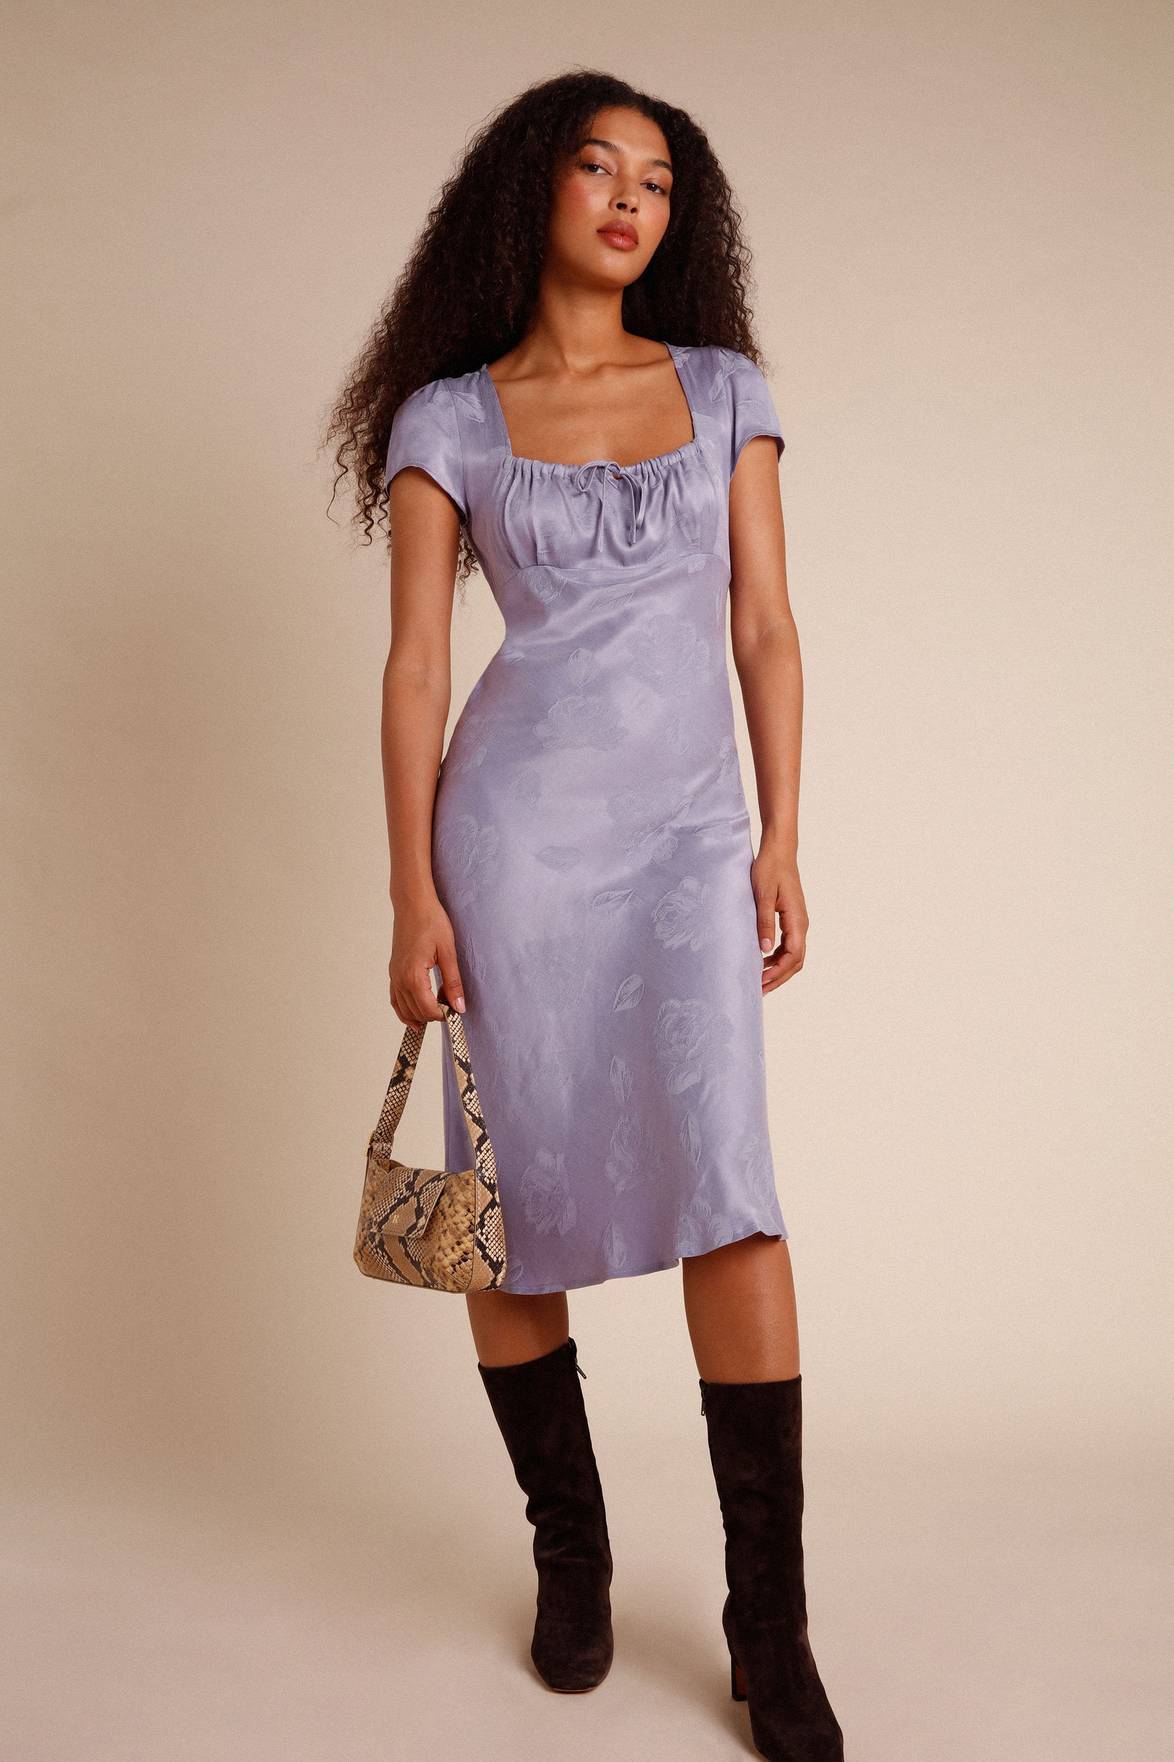 Introducing the versatile Robe Ines. This midi dress features a flattering gathered design on the chest with a unique knot detail. Its bias cut adds a touch of elegance, while the side zipper ensures a perfect fit. Available in lilac jacquard, this dress is the perfect addition to your wardrobe.